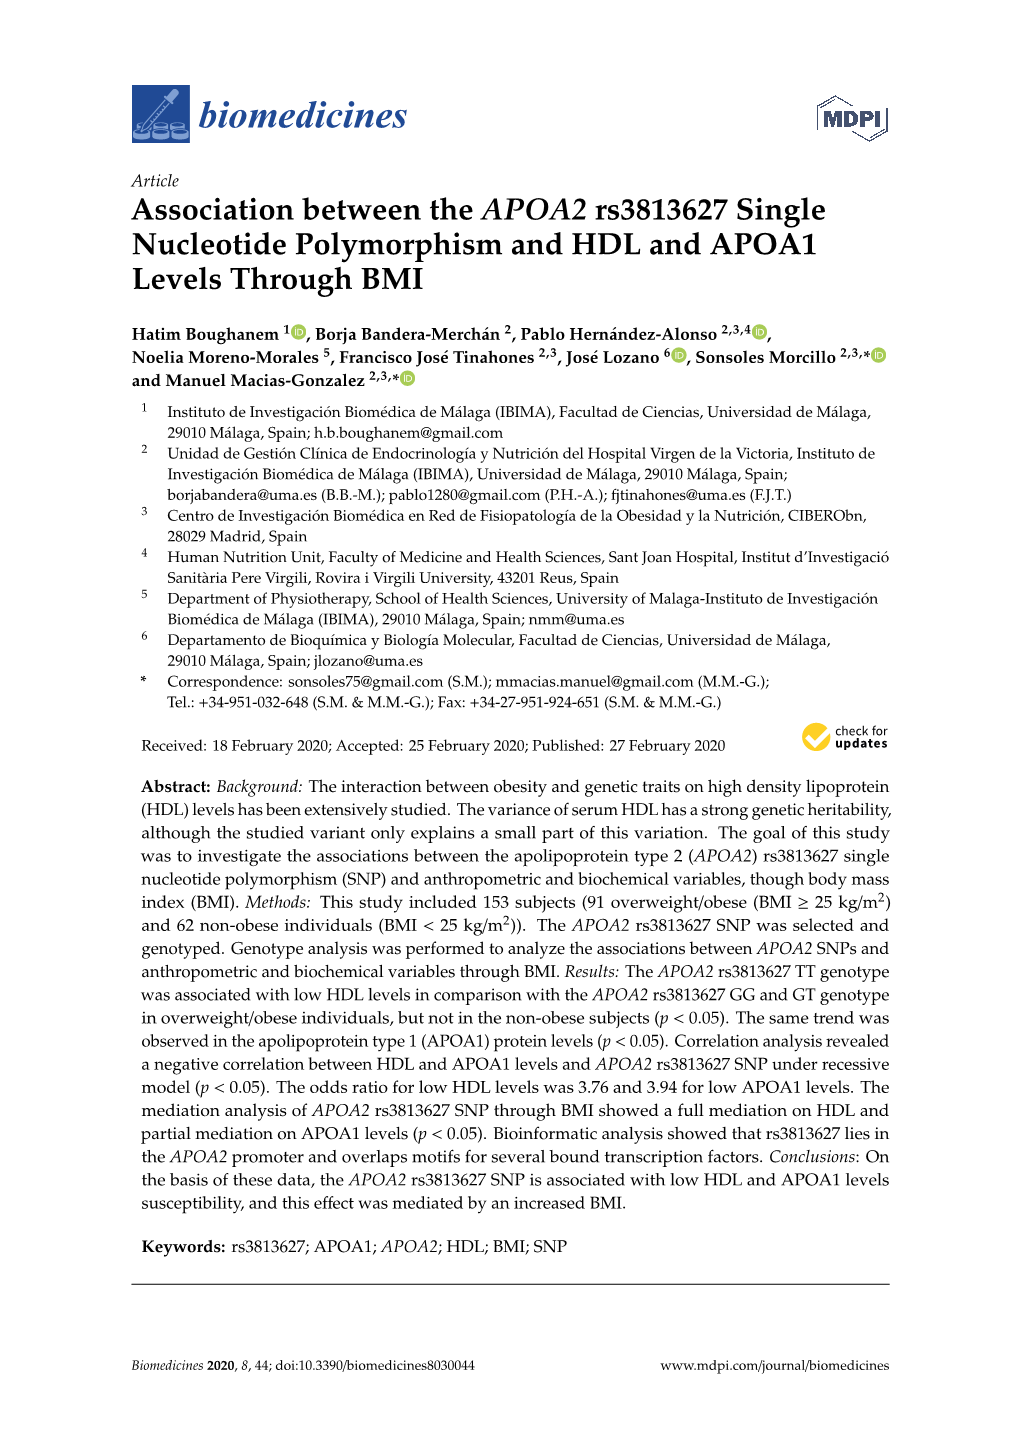 Association Between the APOA2 Rs3813627 Single Nucleotide Polymorphism and HDL and APOA1 Levels Through BMI